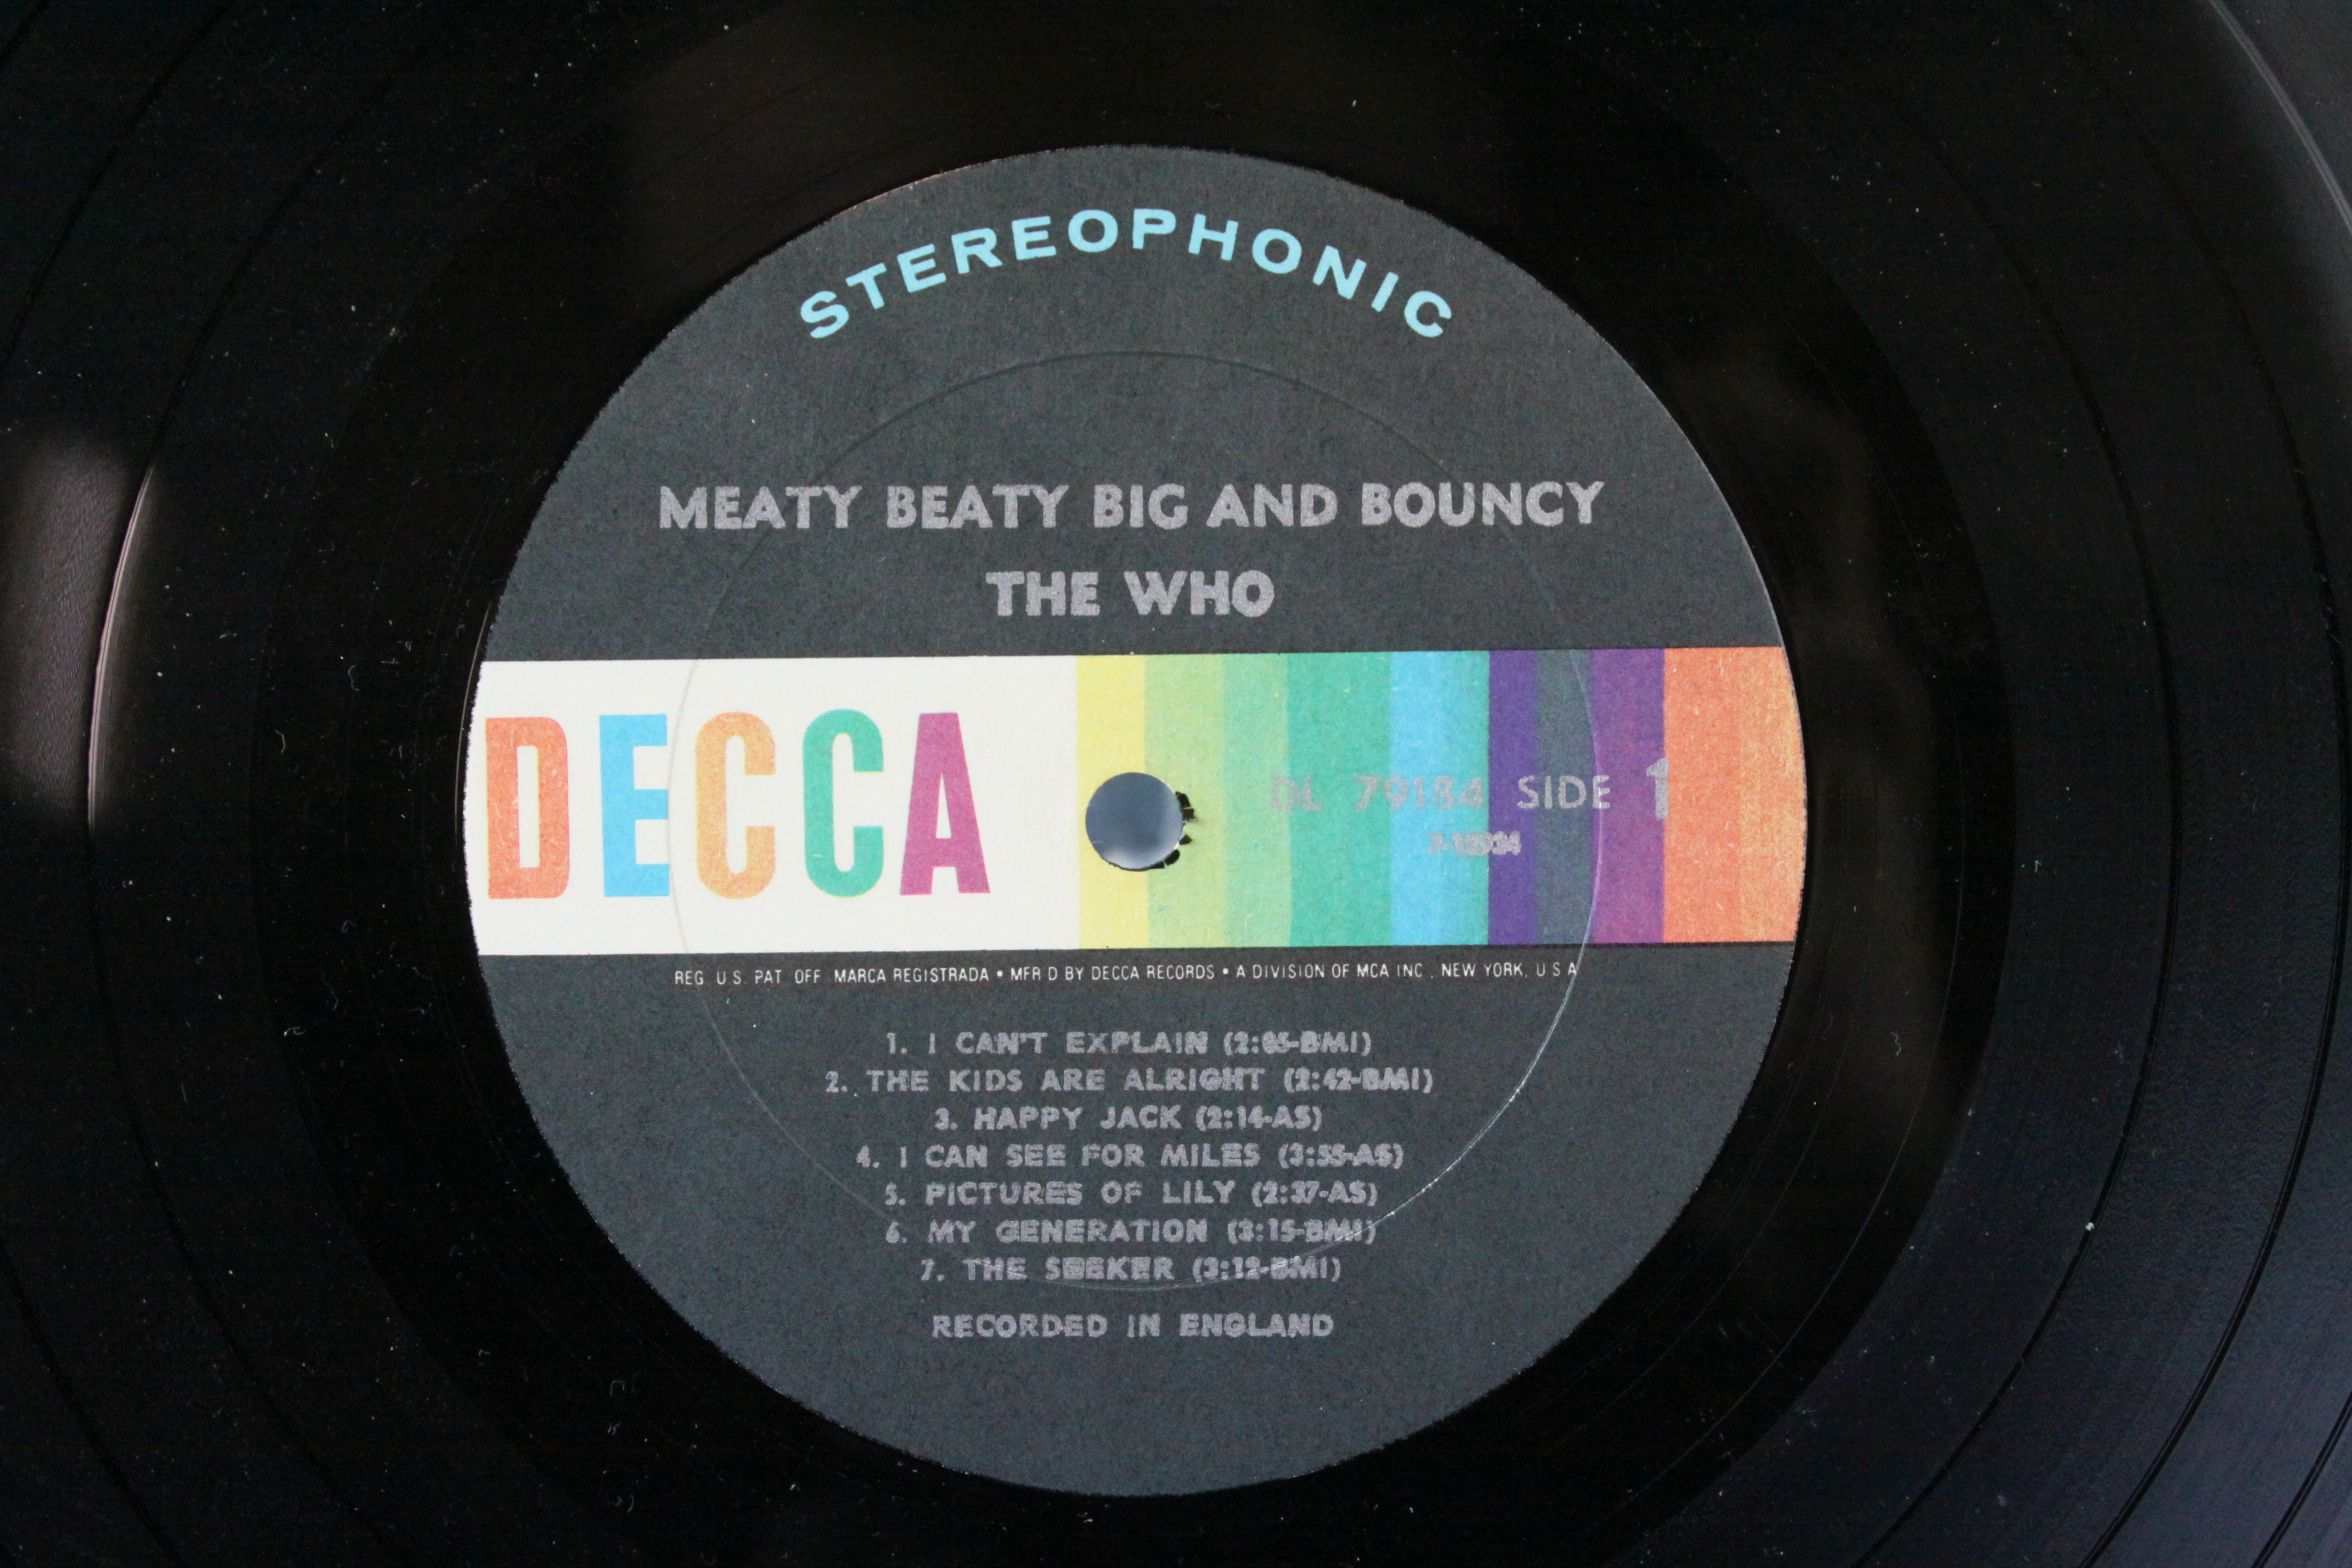 Music Memorabilia - The Who Meaty Beaty Big And Bouncy - fully signed by the band inc Keith Moon - Image 9 of 11